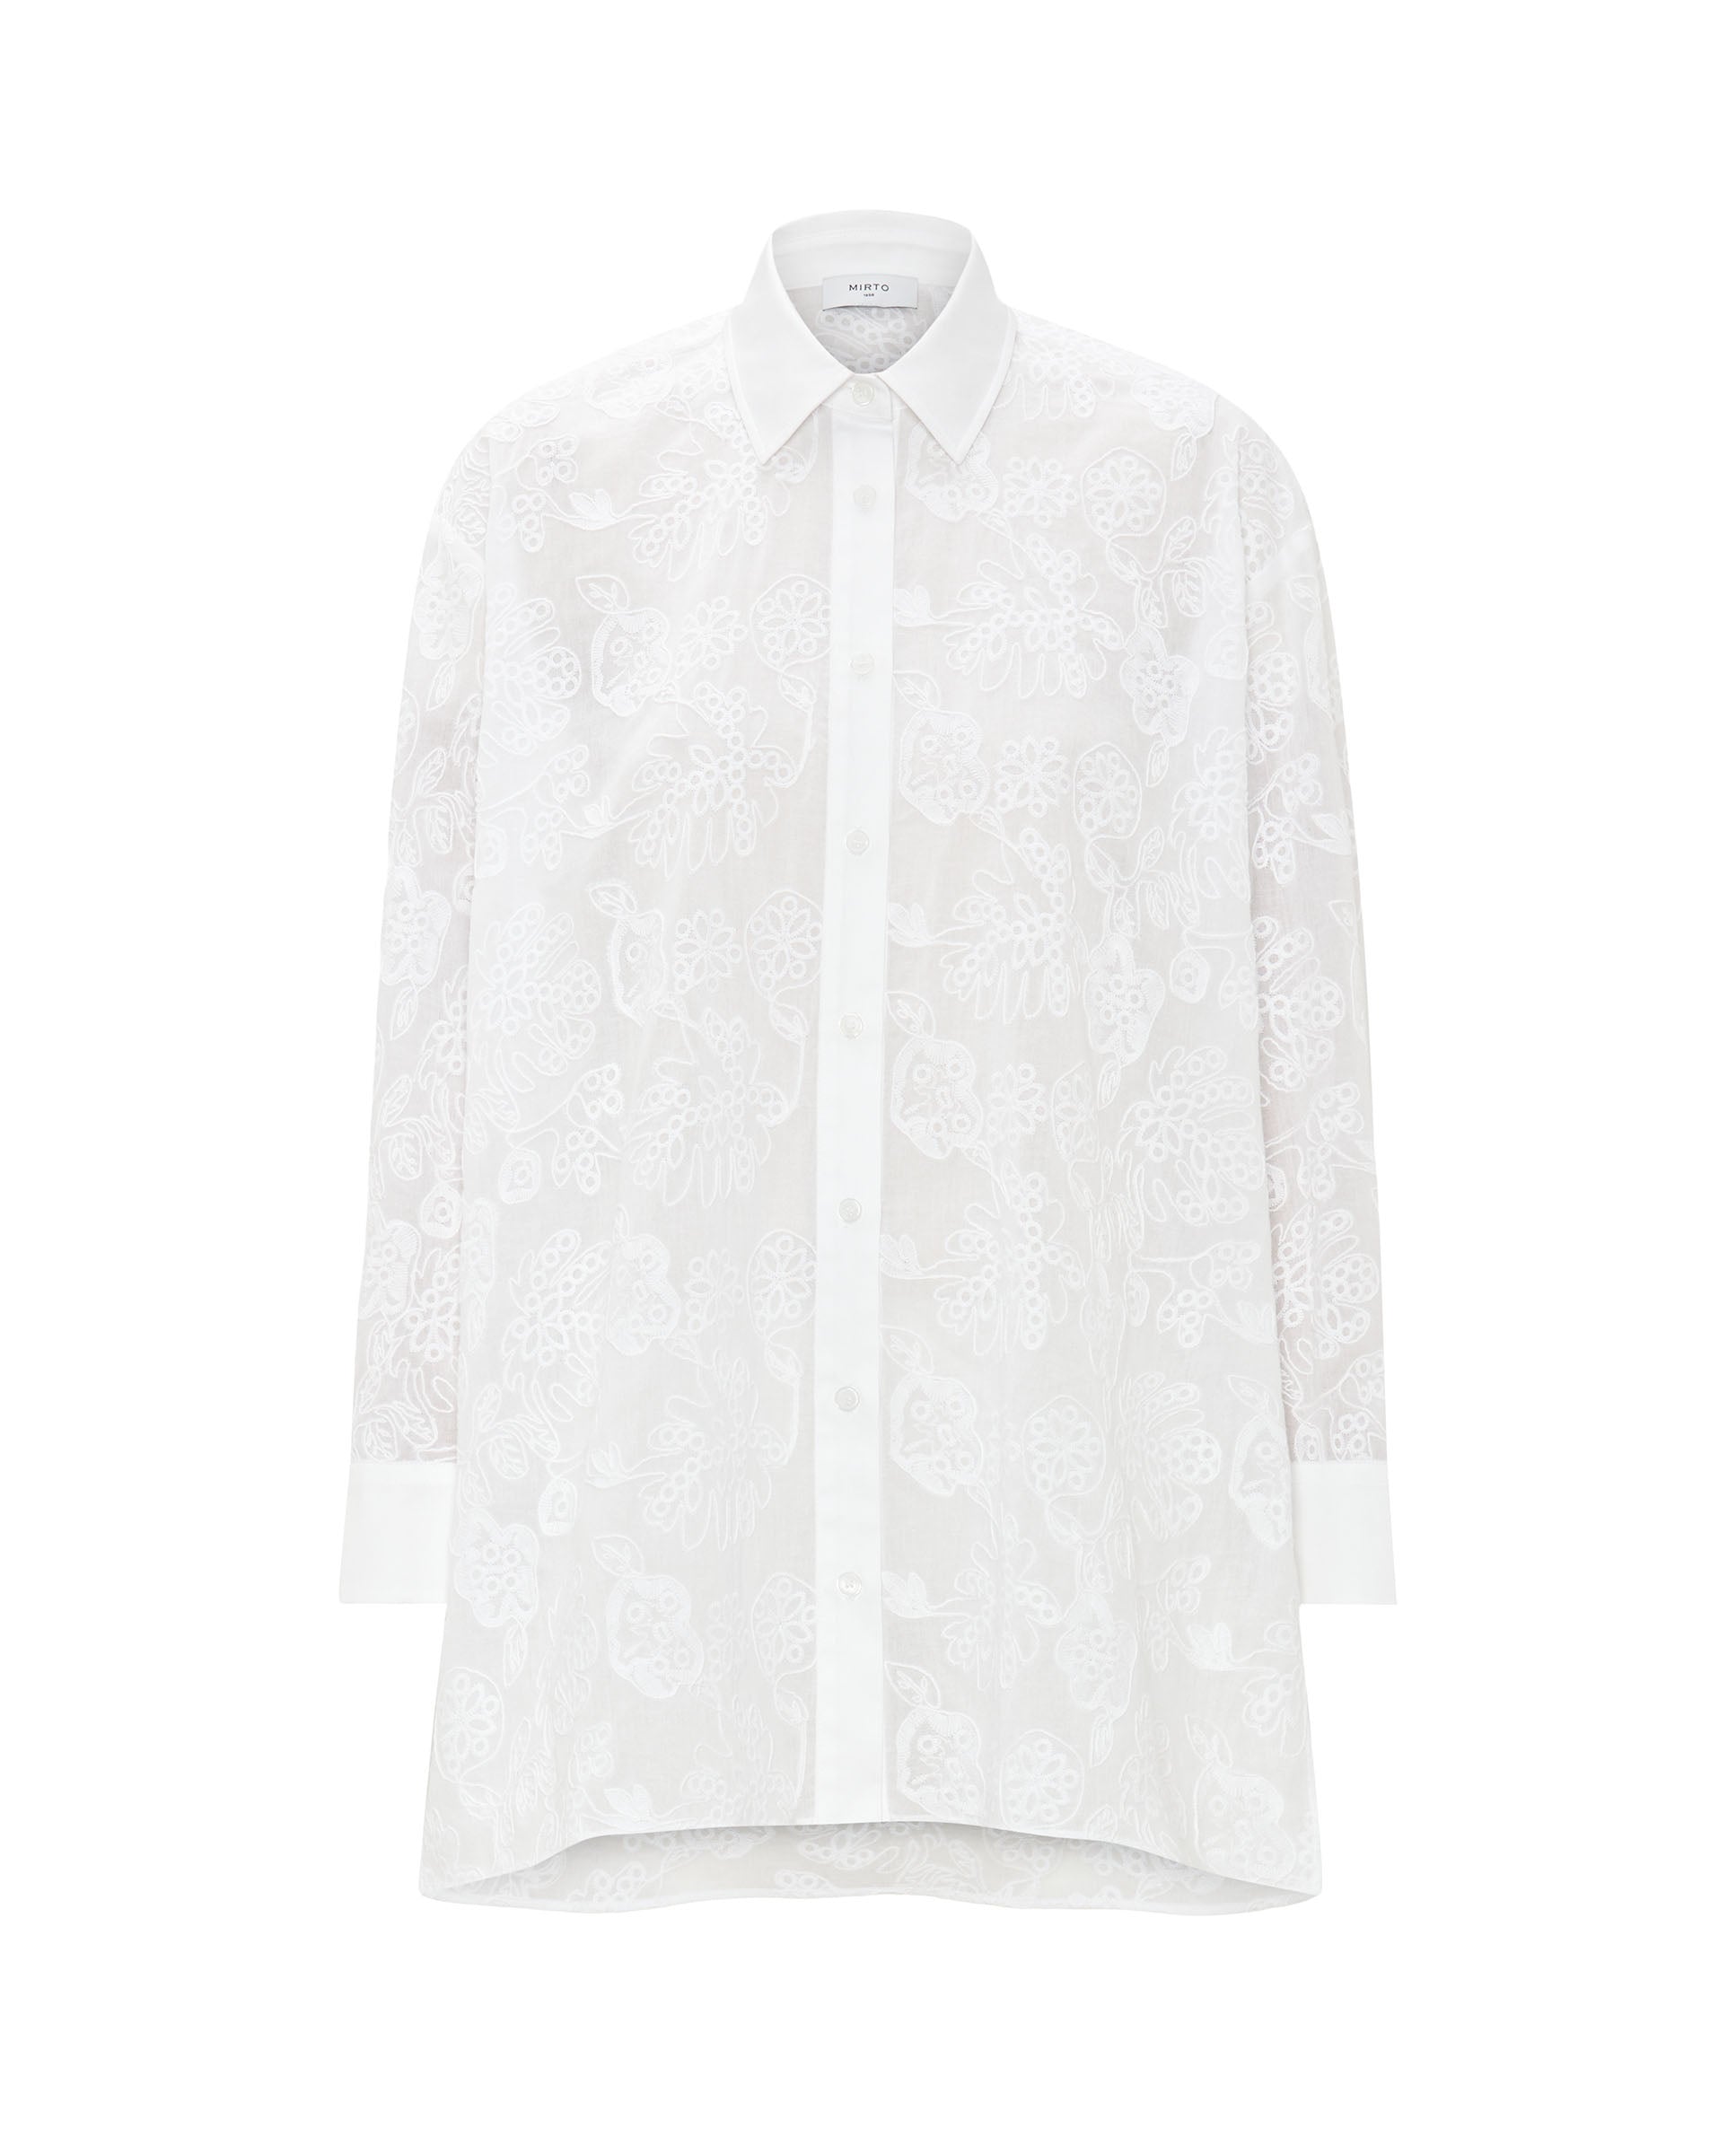 White cotton oversize embroidered shirt by MIRTO